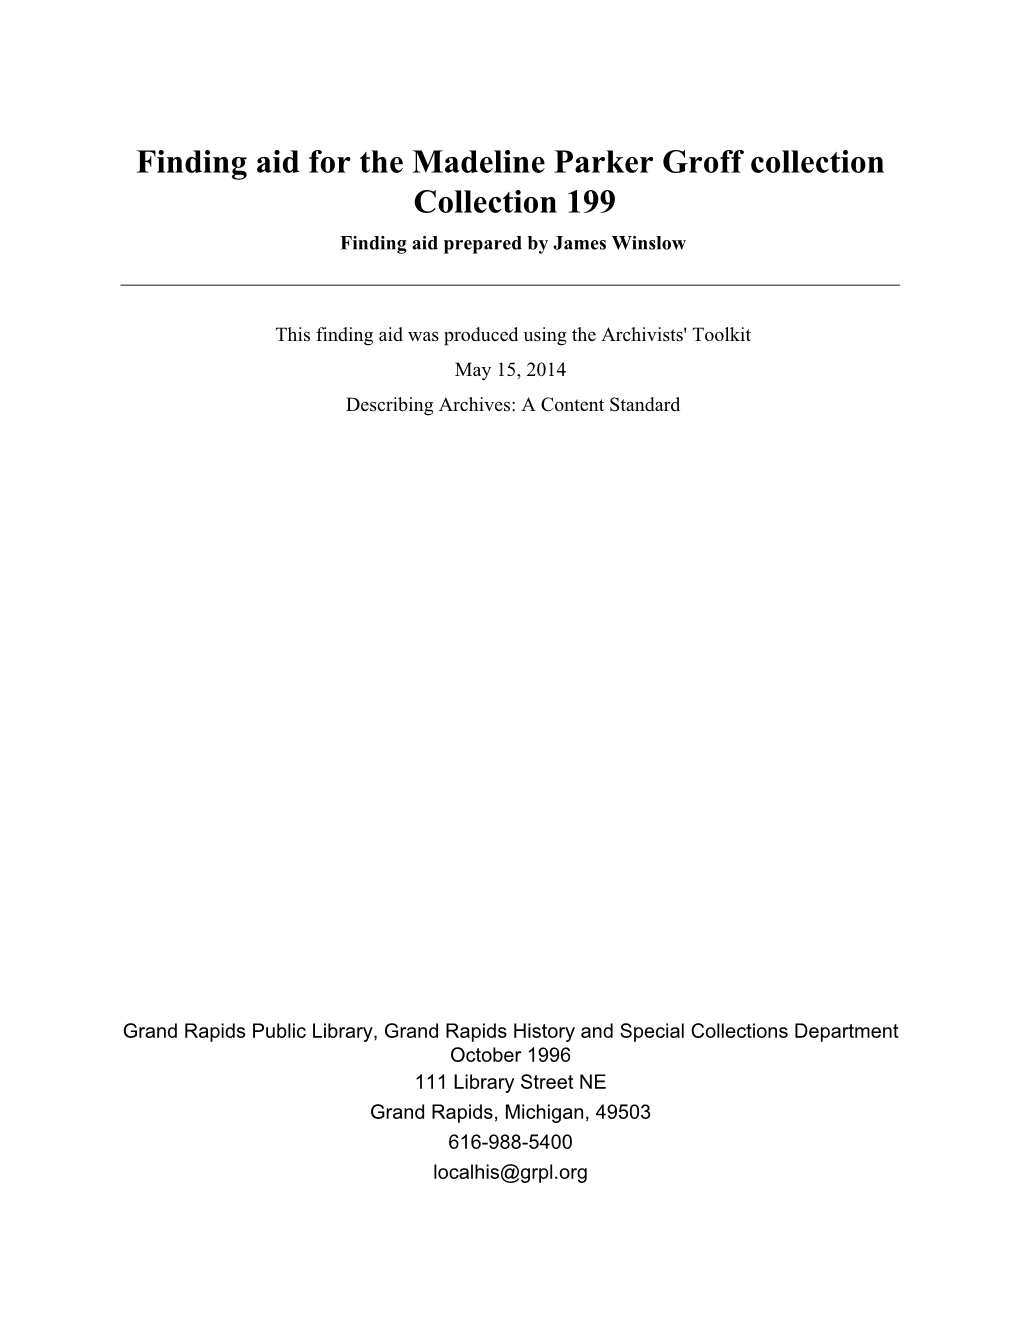 Finding Aid for the Madeline Parker Groff Collection Collection 199 Finding Aid Prepared by James Winslow